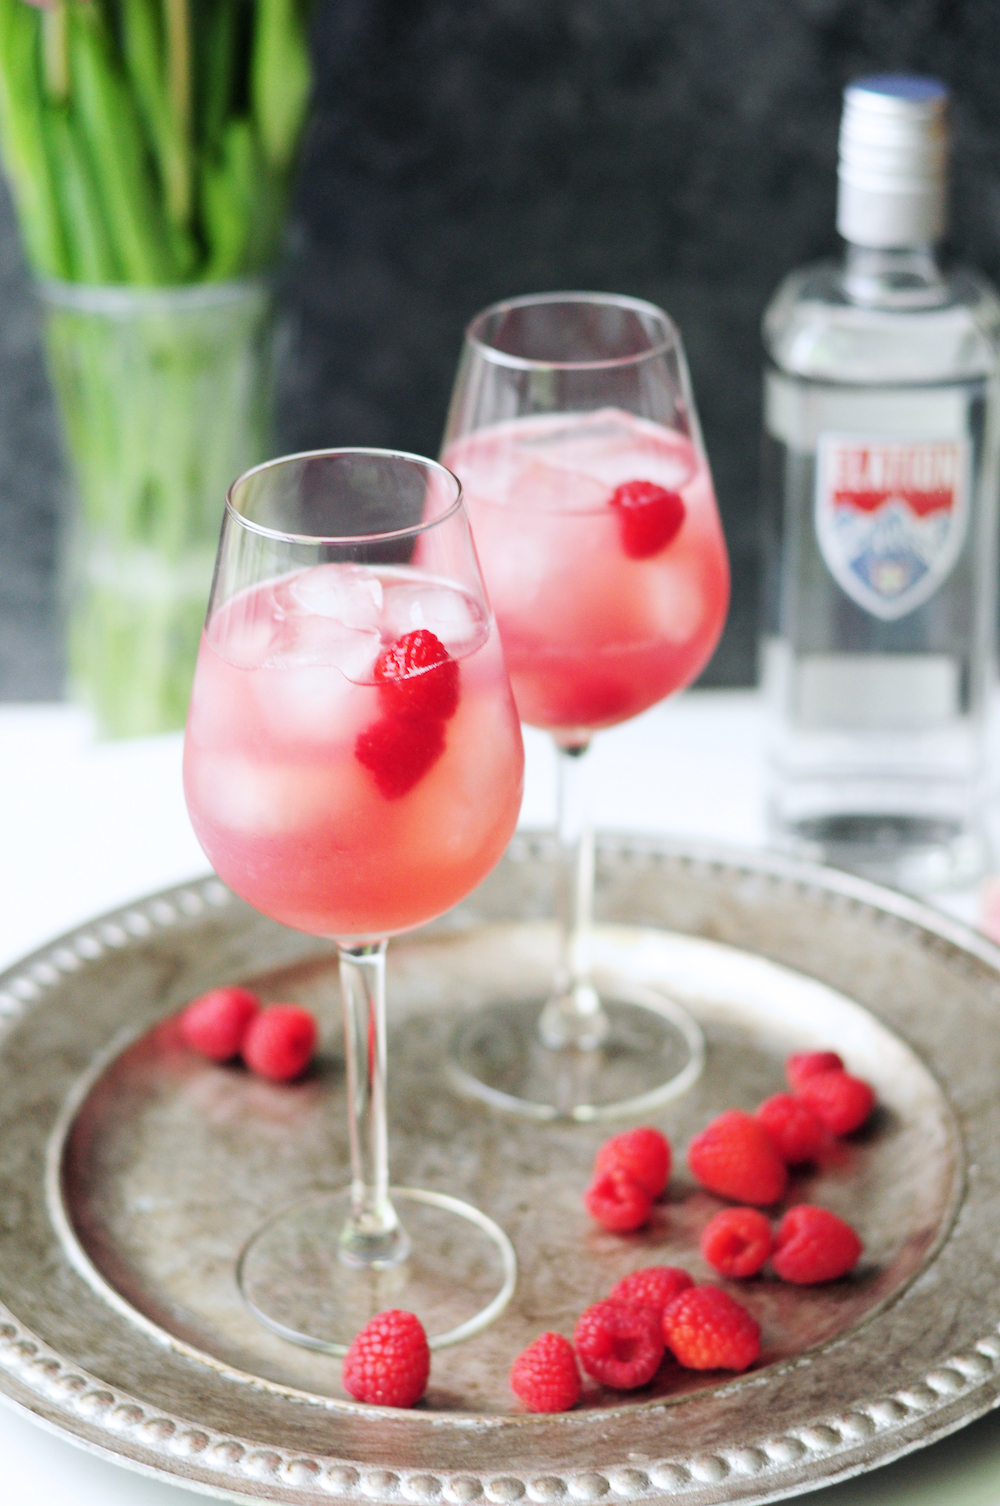 This Meyer lemon raspberry cocktail is the perfect combination of tart and sweet, which makes it an ideal (yet versatile) spring or summer patio drink.